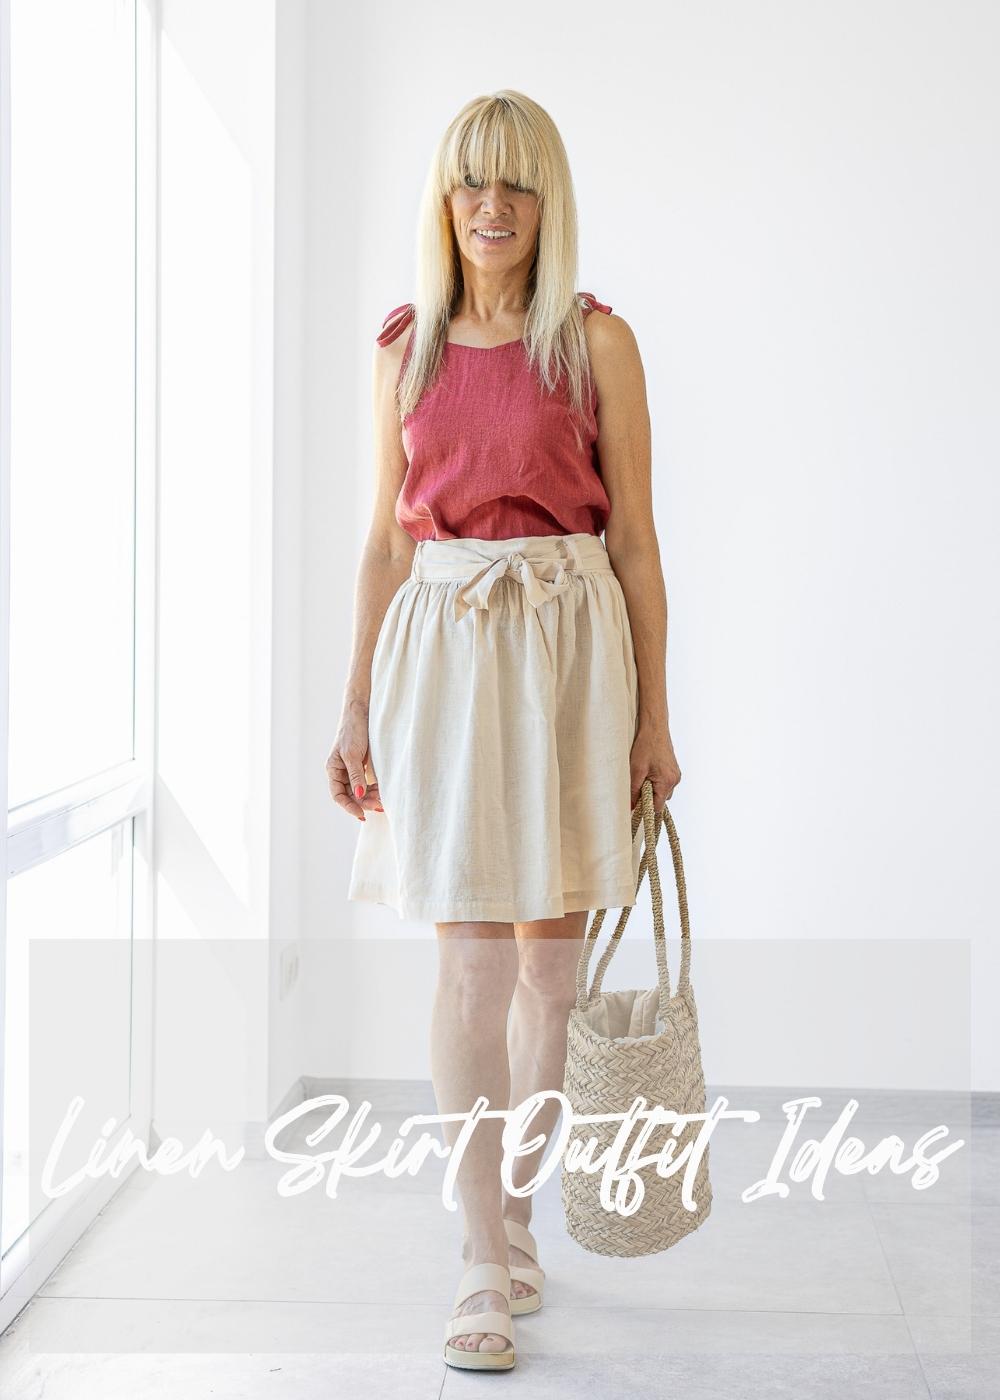 Linen Skirt Outfit Ideas For All Stages Of Life